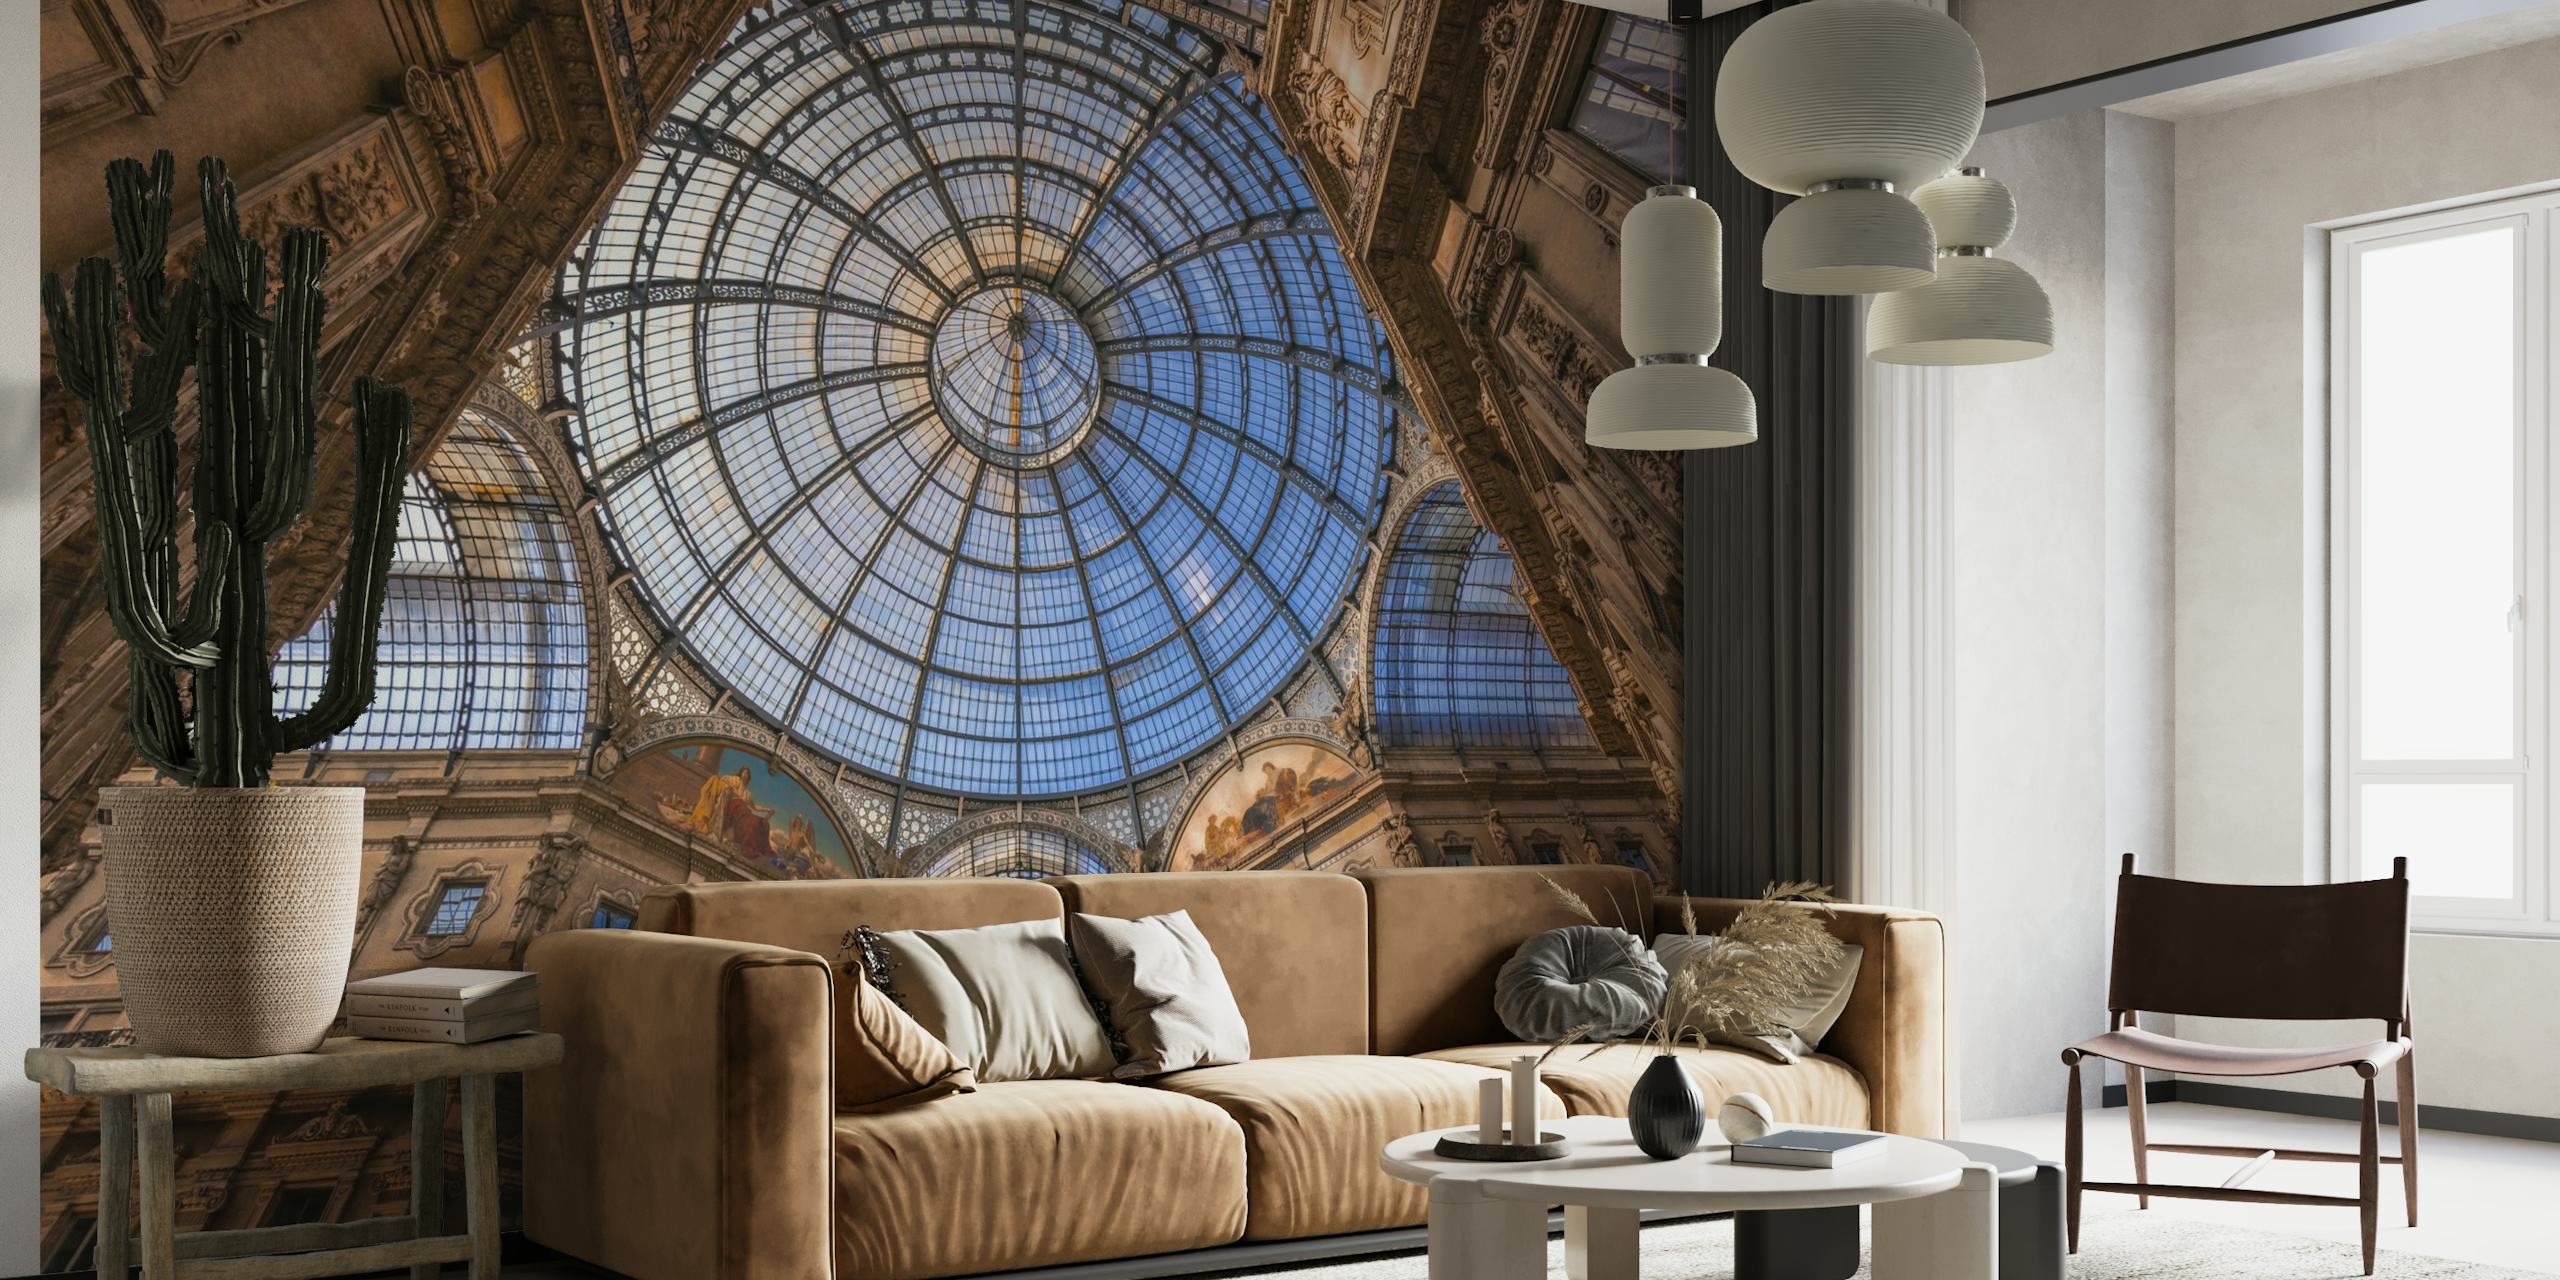 Architectural dome ceiling mural in shades of blue and beige, enhancing room decor with a majestic touch.